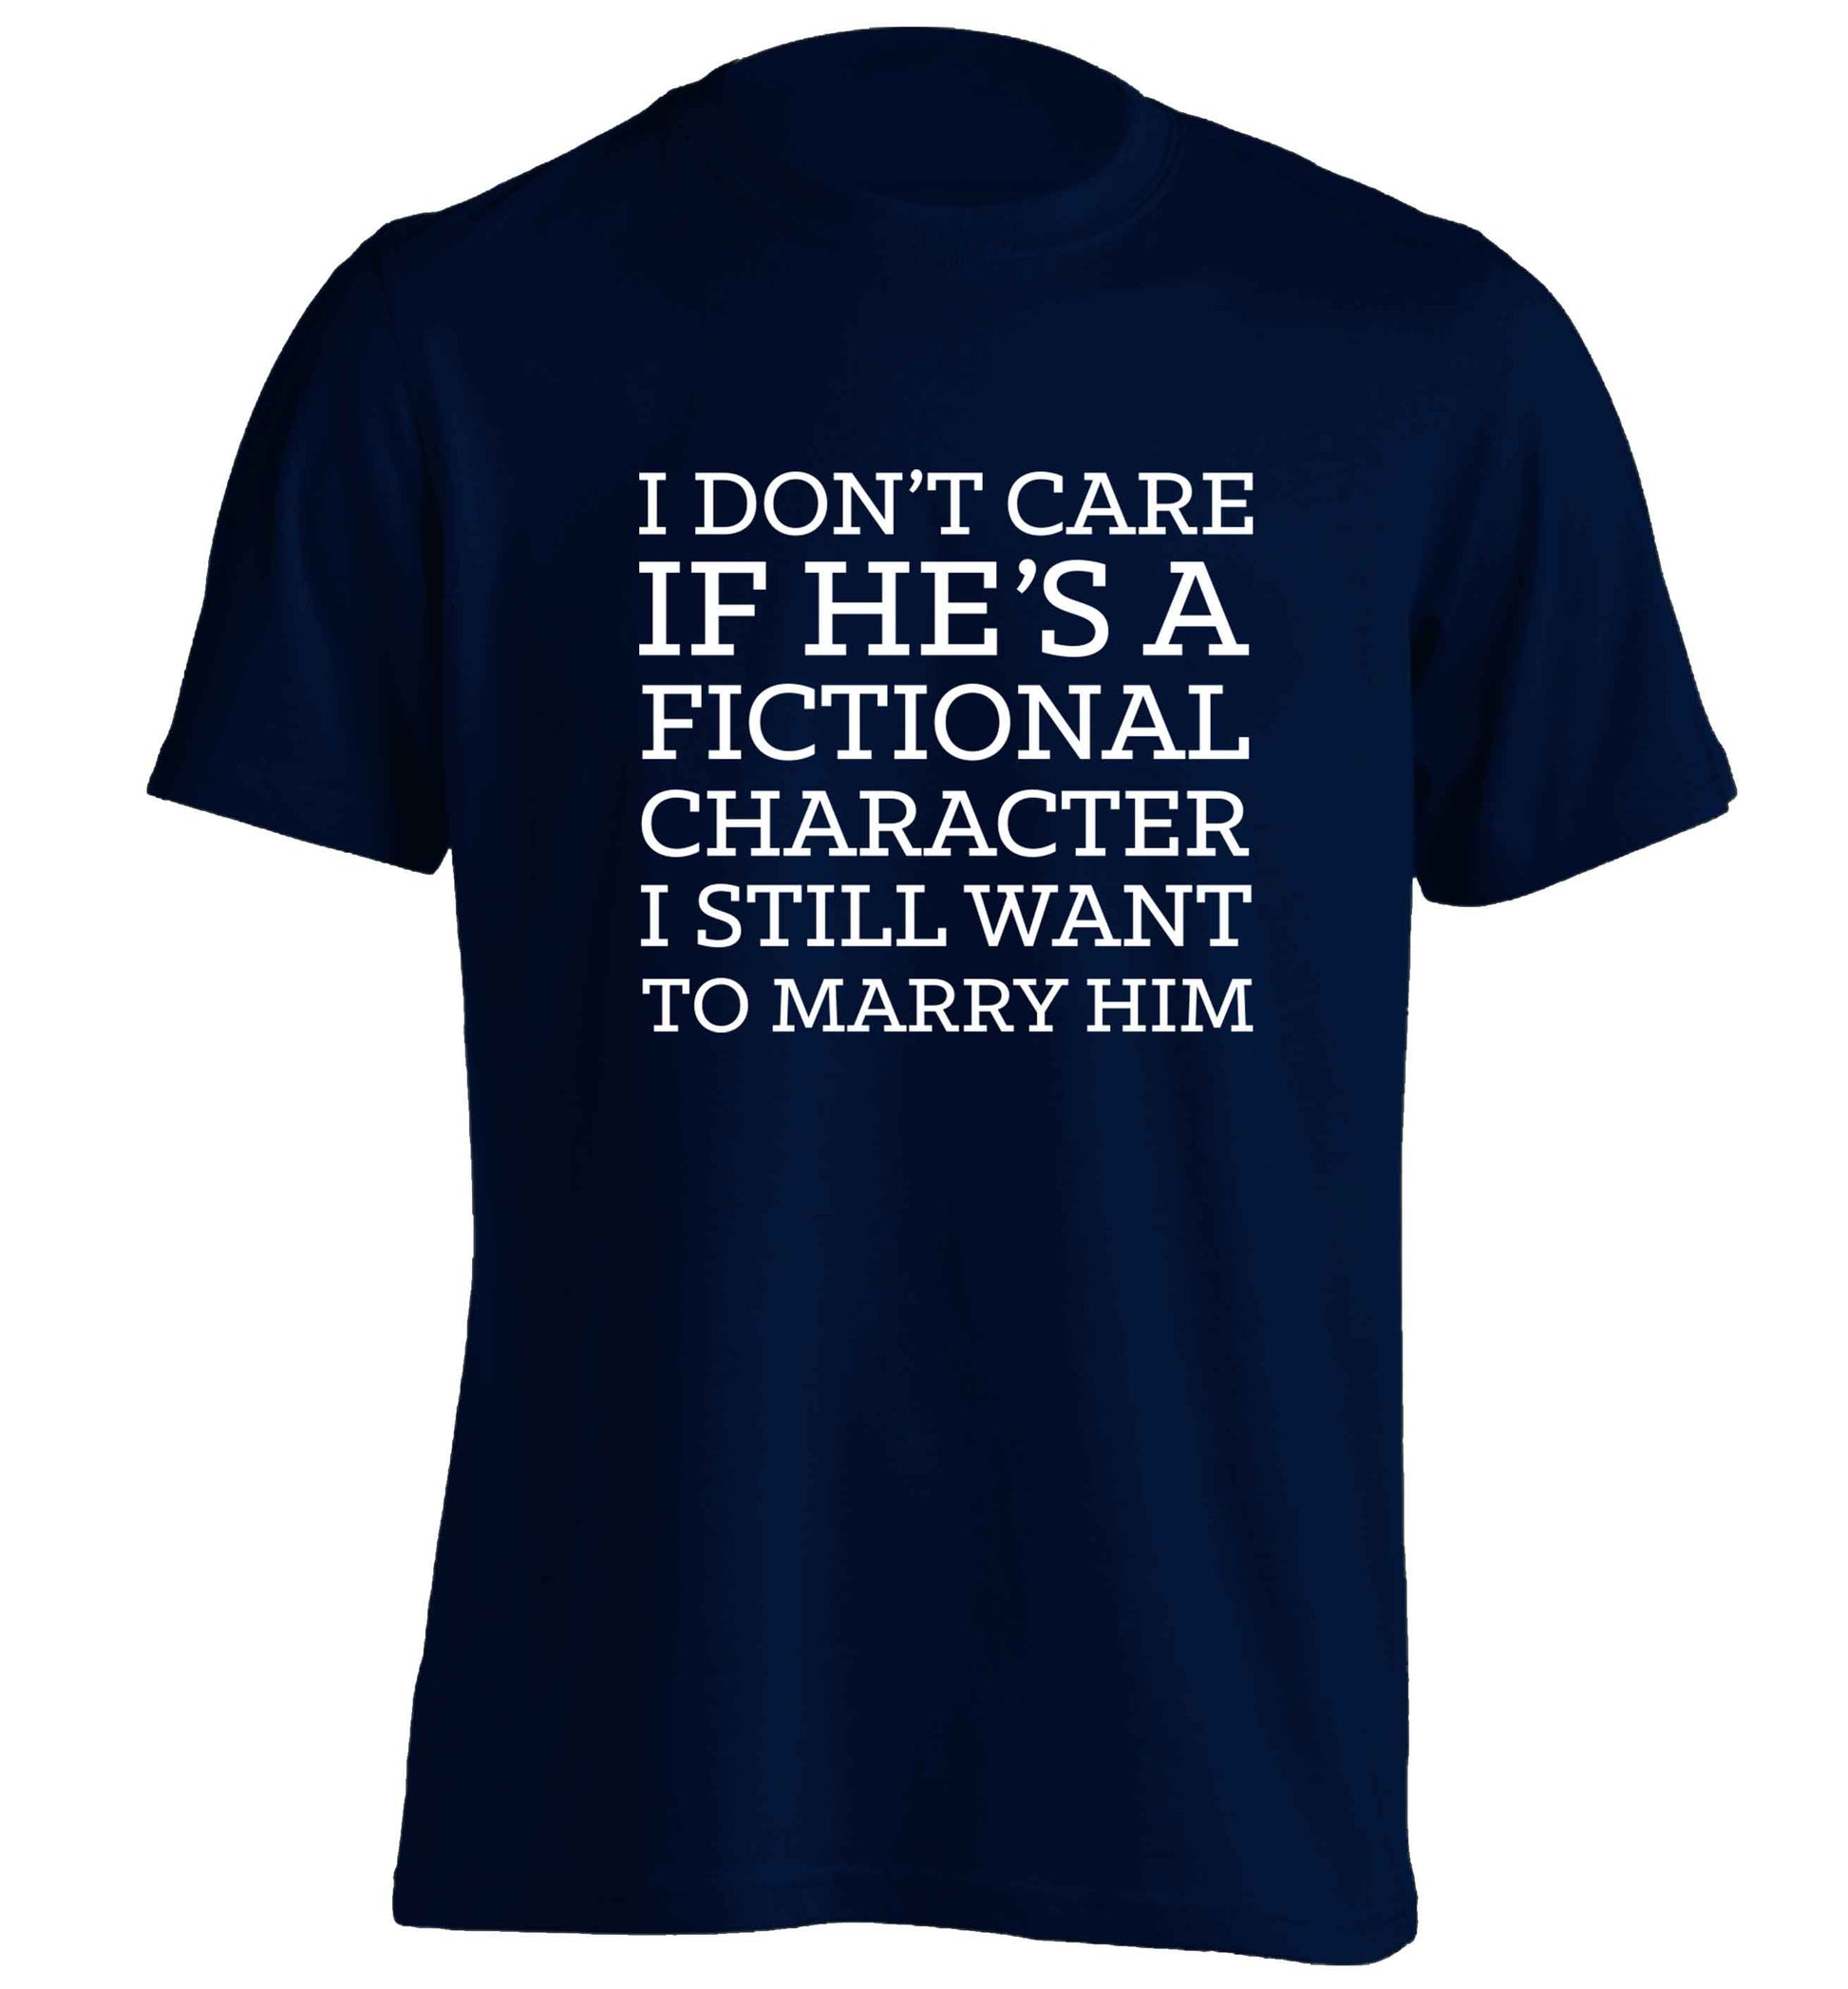 I don't care if he's a fictional character I still want to marry him adults unisex navy Tshirt 2XL